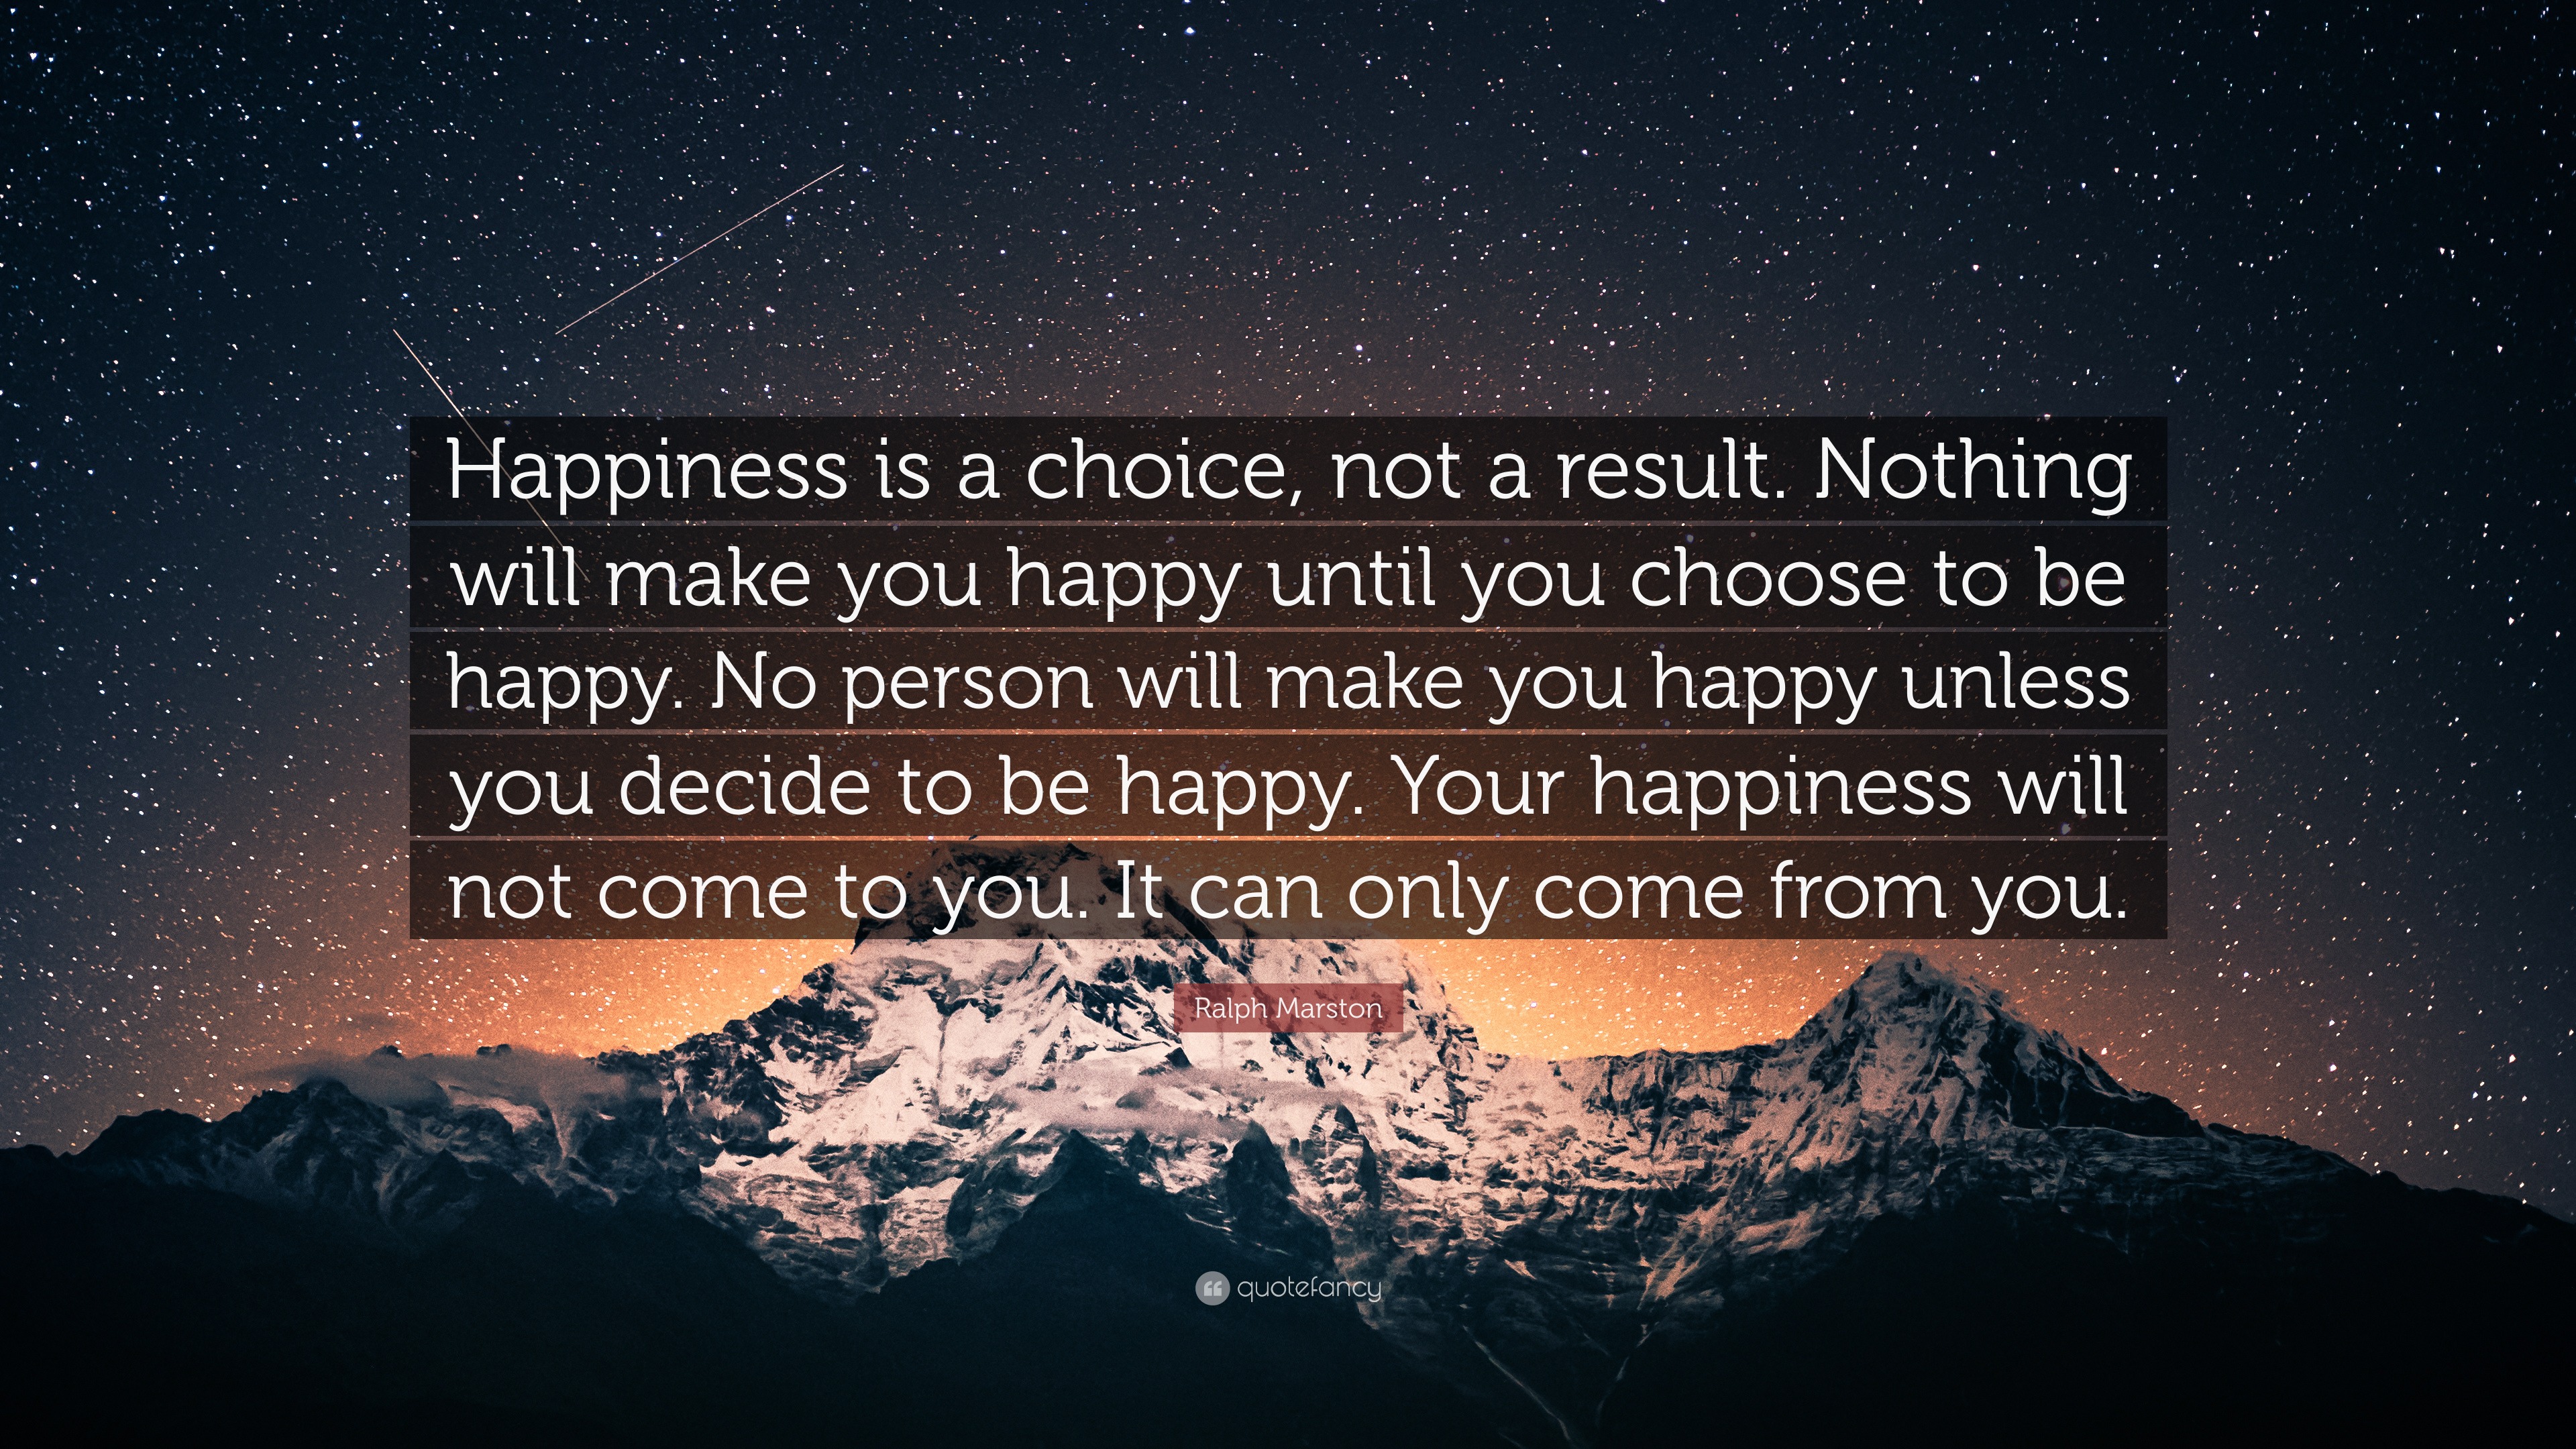 Ralph Marston Quote Happiness Is A Choice Not A Result Nothing Will Make You Happy Until You Choose To Be Happy No Person Will Make You H 9 Wallpapers Quotefancy